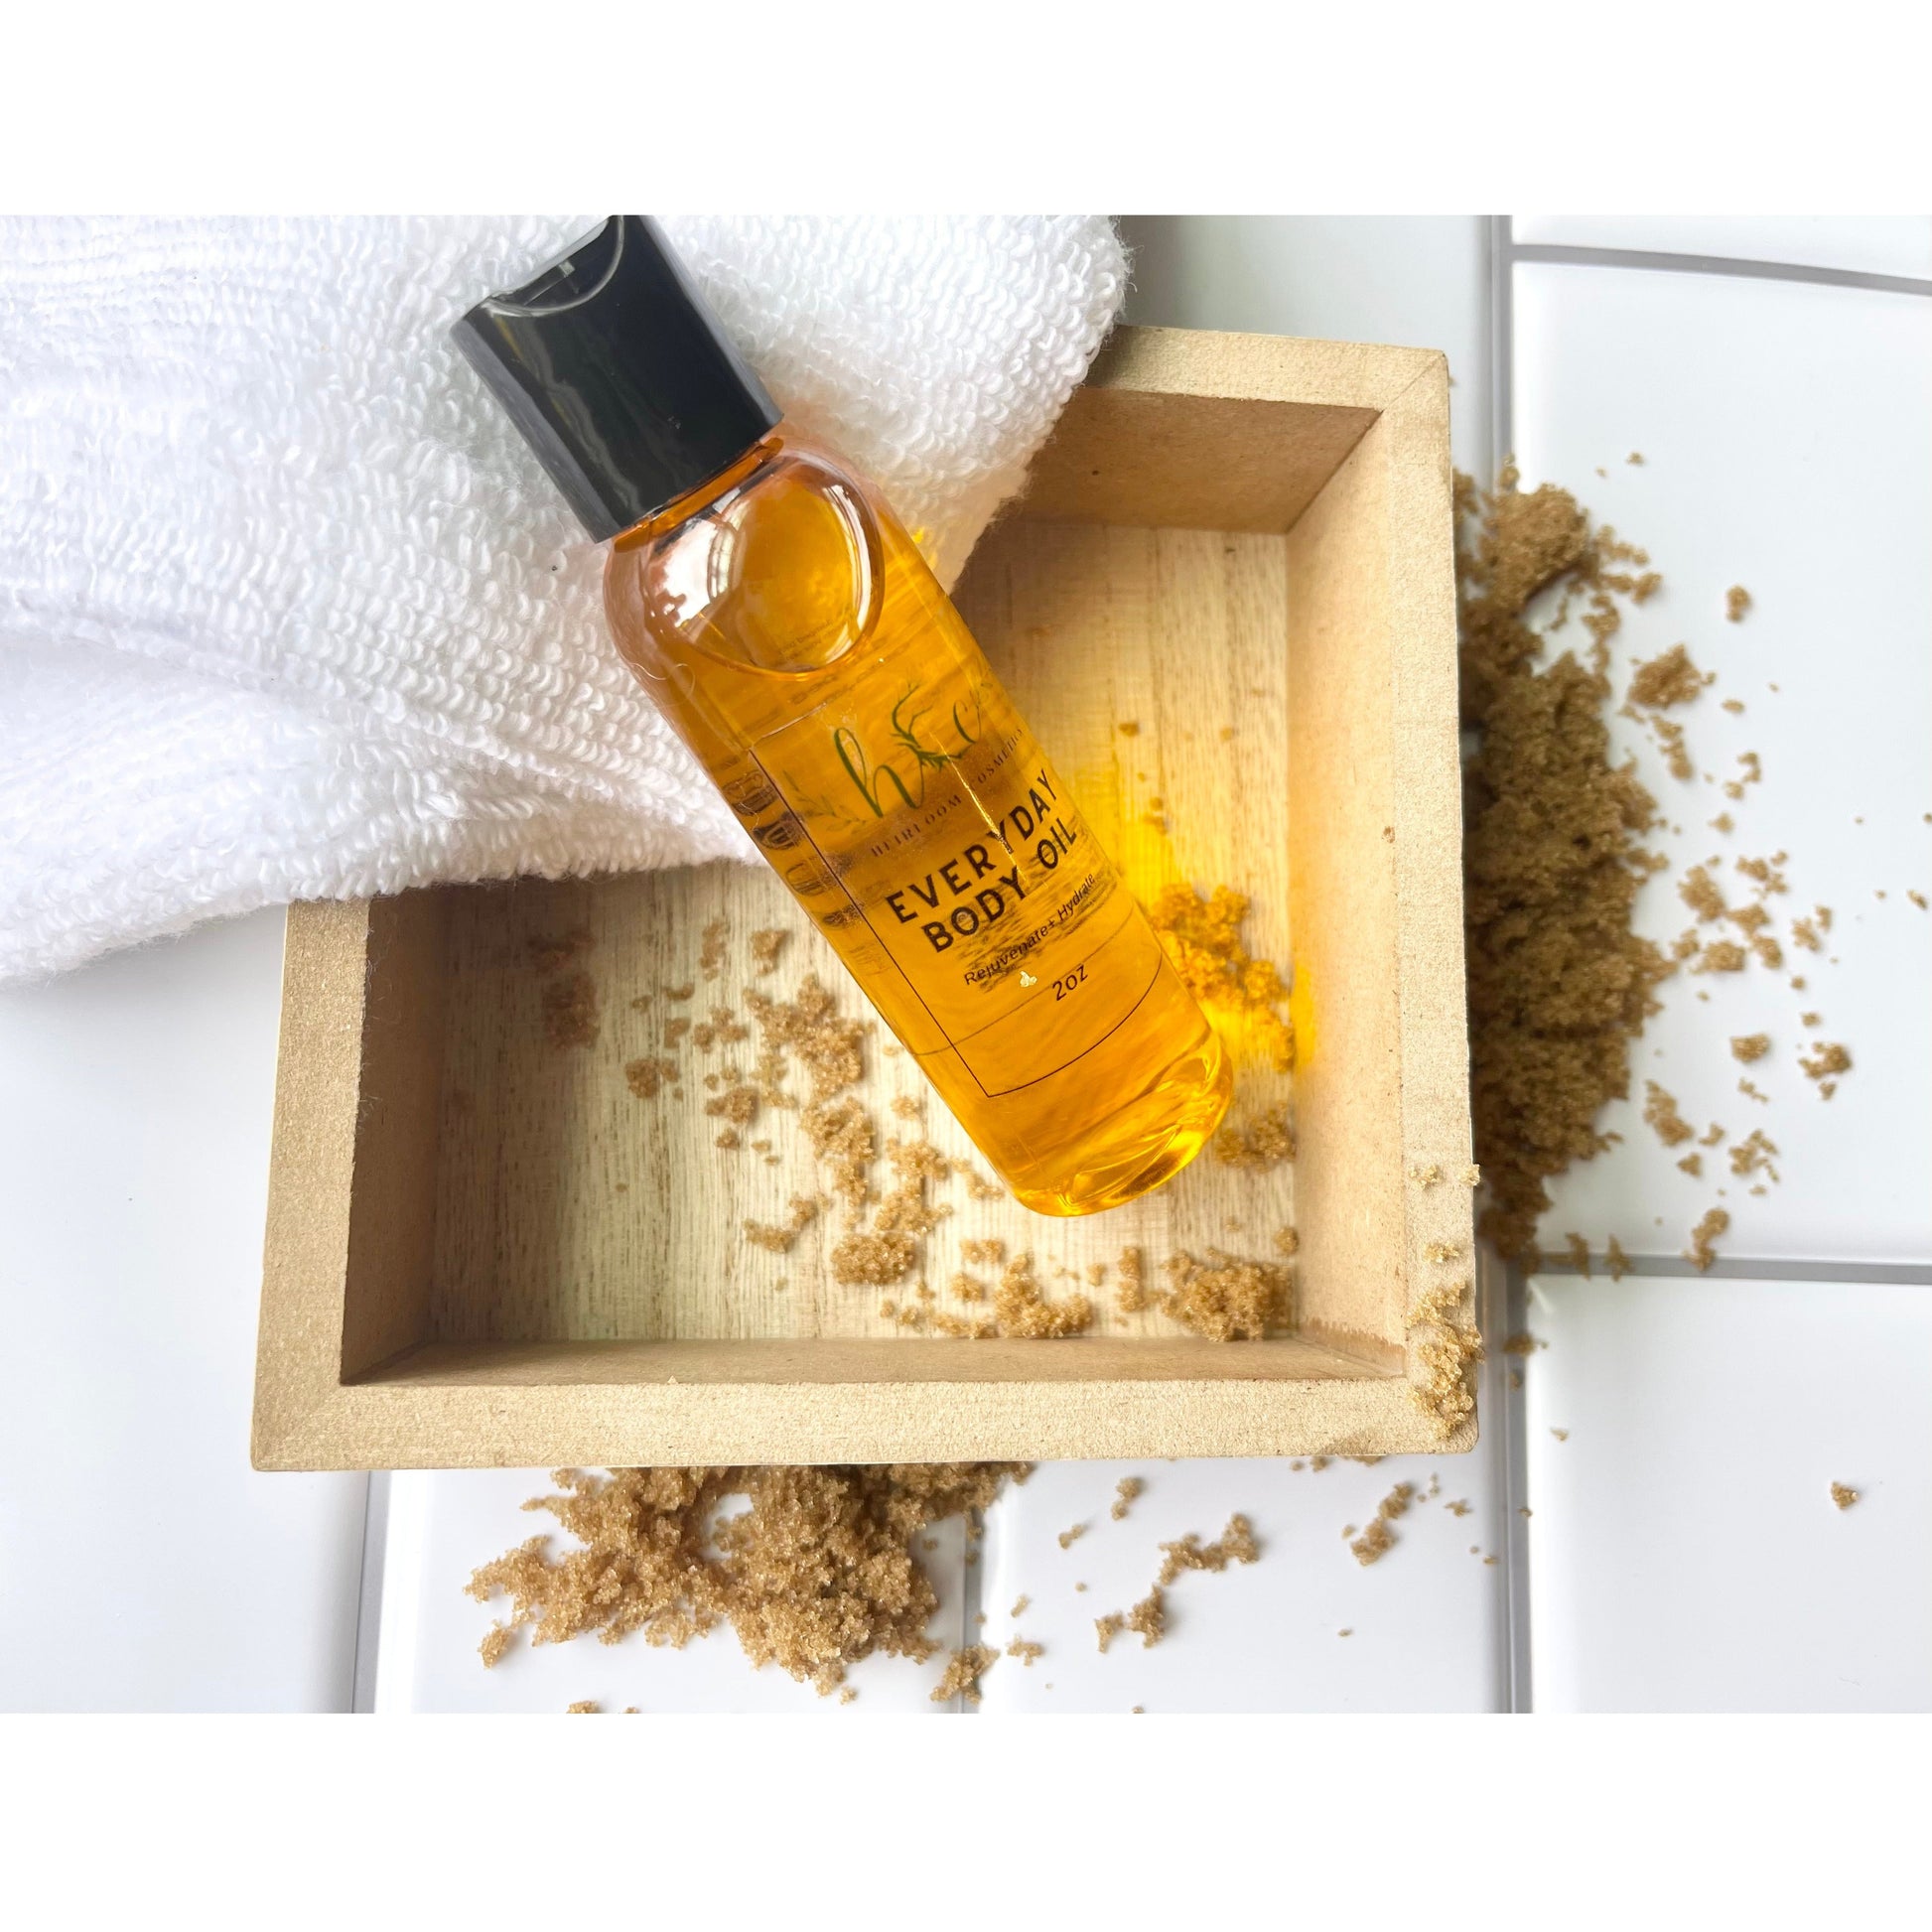 Brown Sugar and Syrup Lightly scented body oil. Every Day use